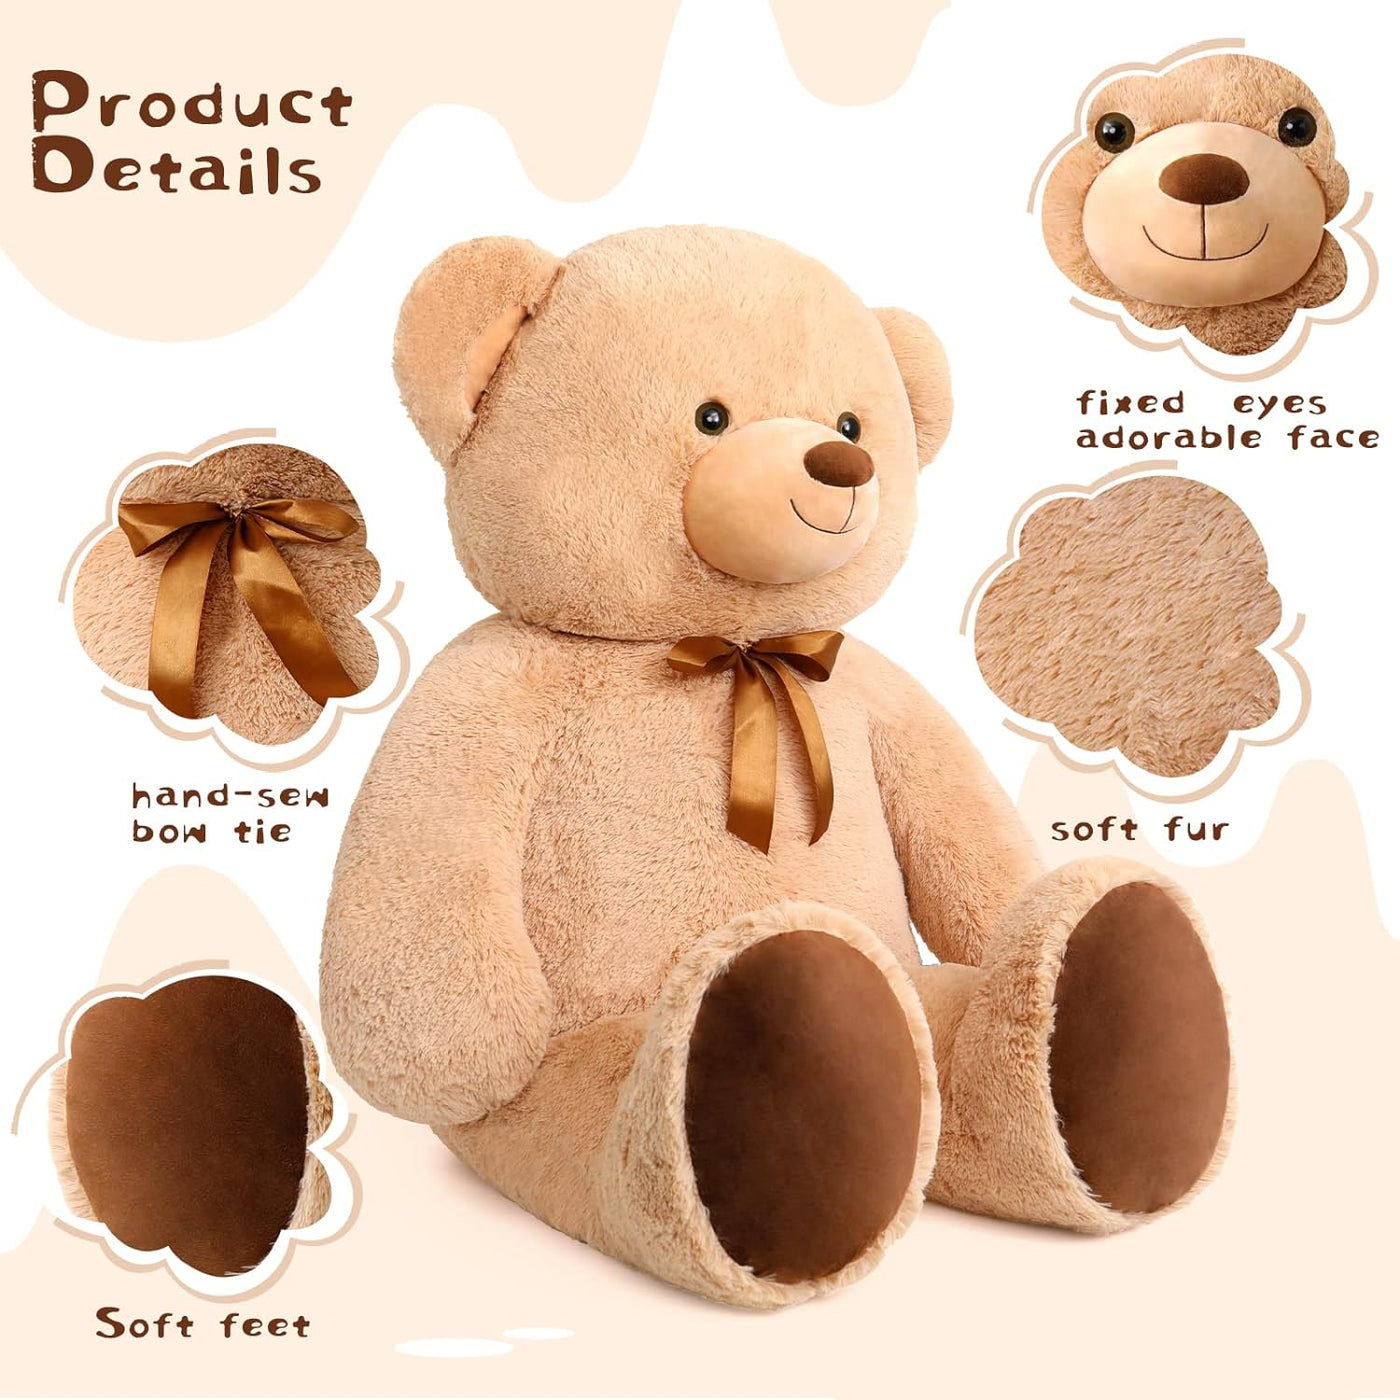 Giant Teddy Bear Plush Toy, Pink/Light Brown, 47 Inches